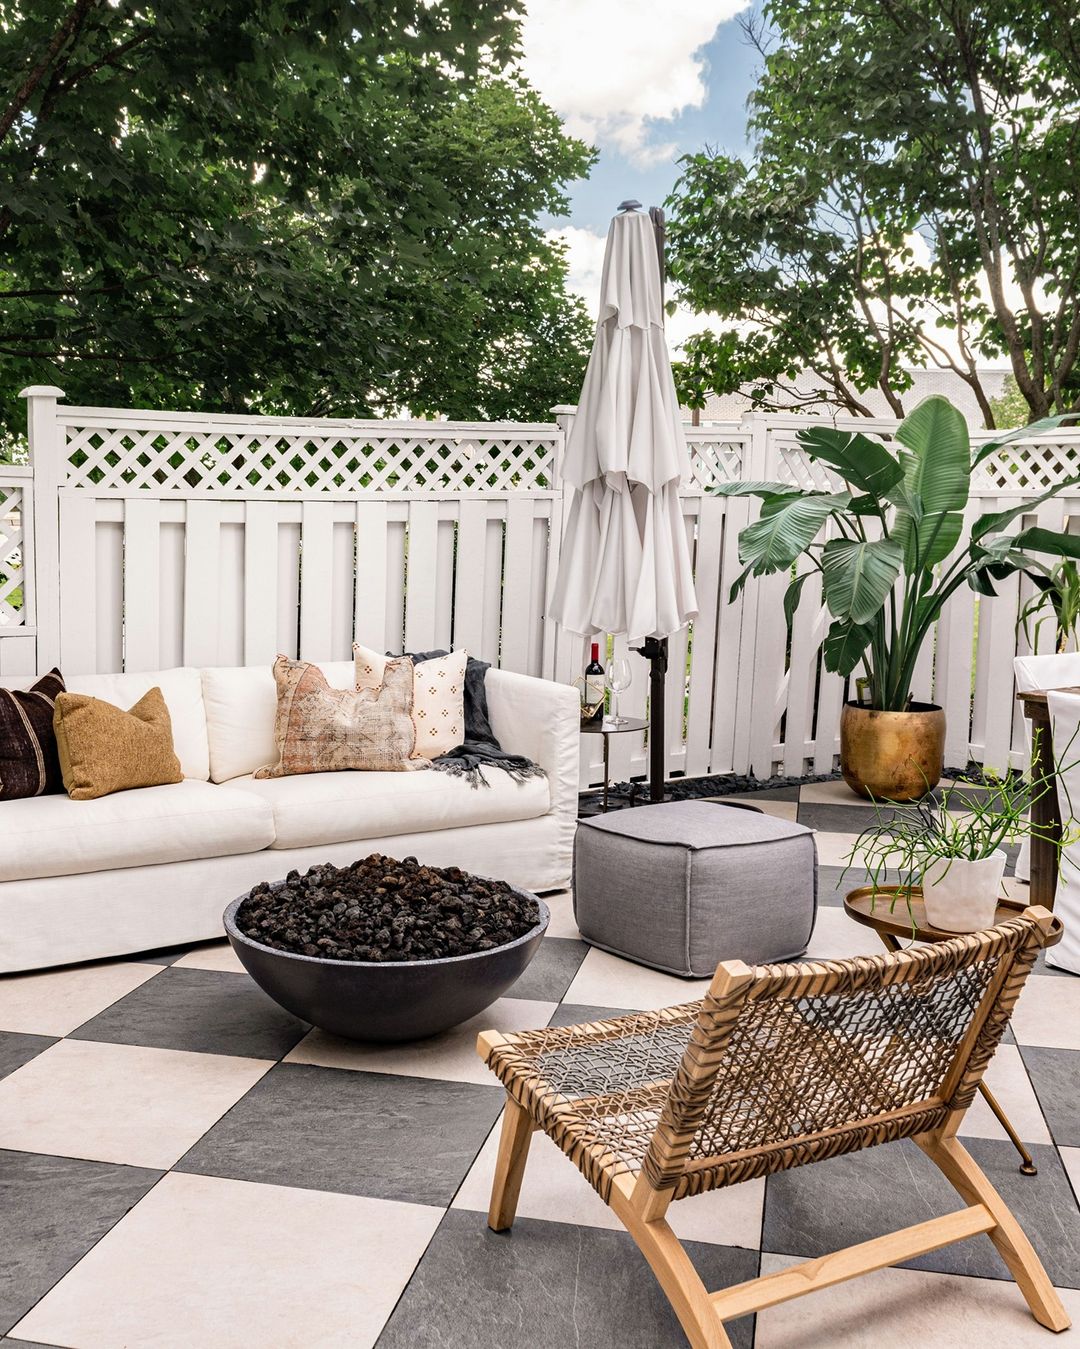 Beautiful outdoor seating area and living space with checkerboard tile flooring and sofa - patio ideas 